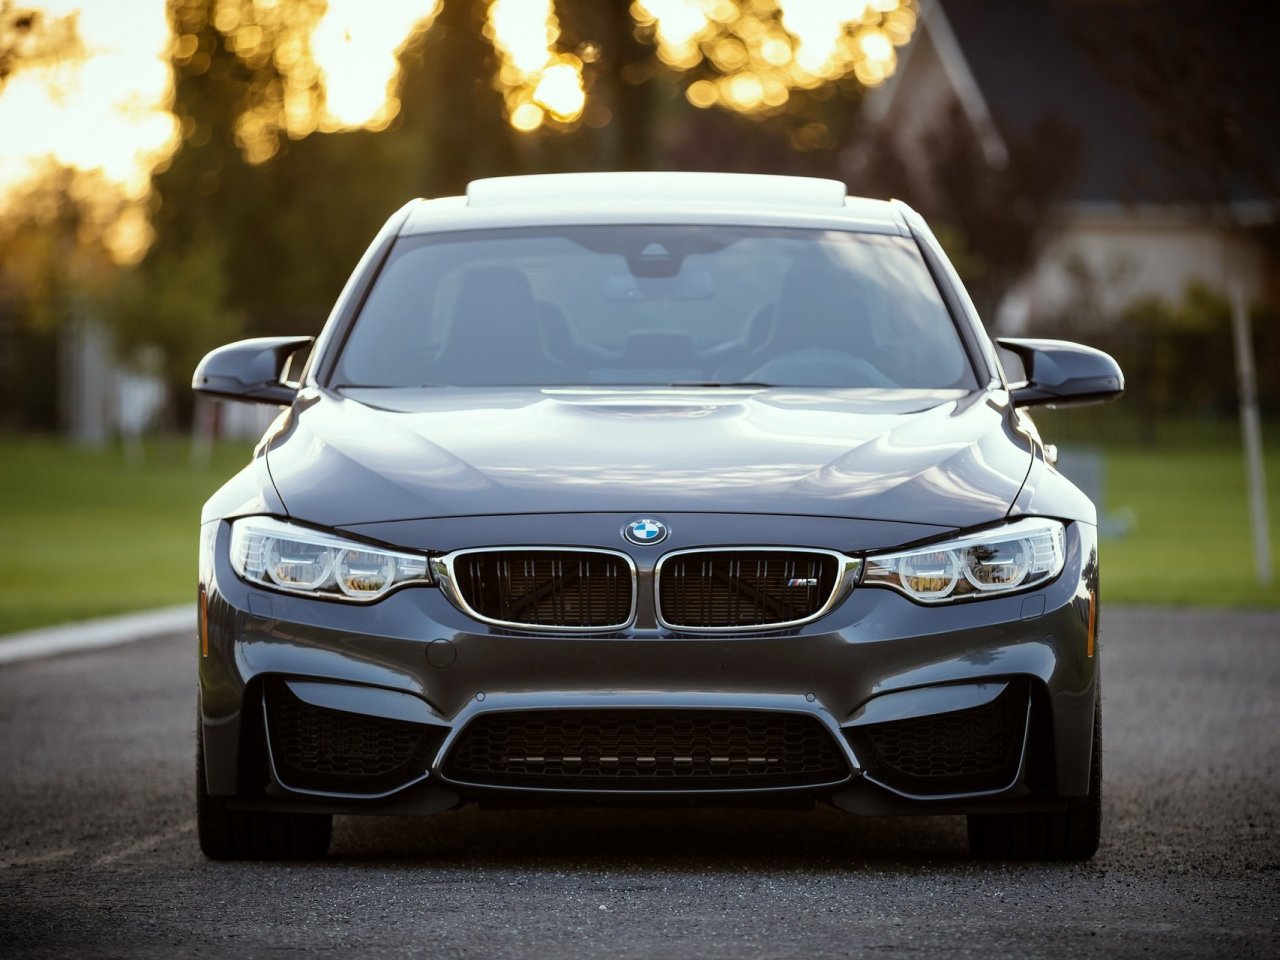 BMW sport car jigsaw puzzle - collect free online jigsaw puzzles